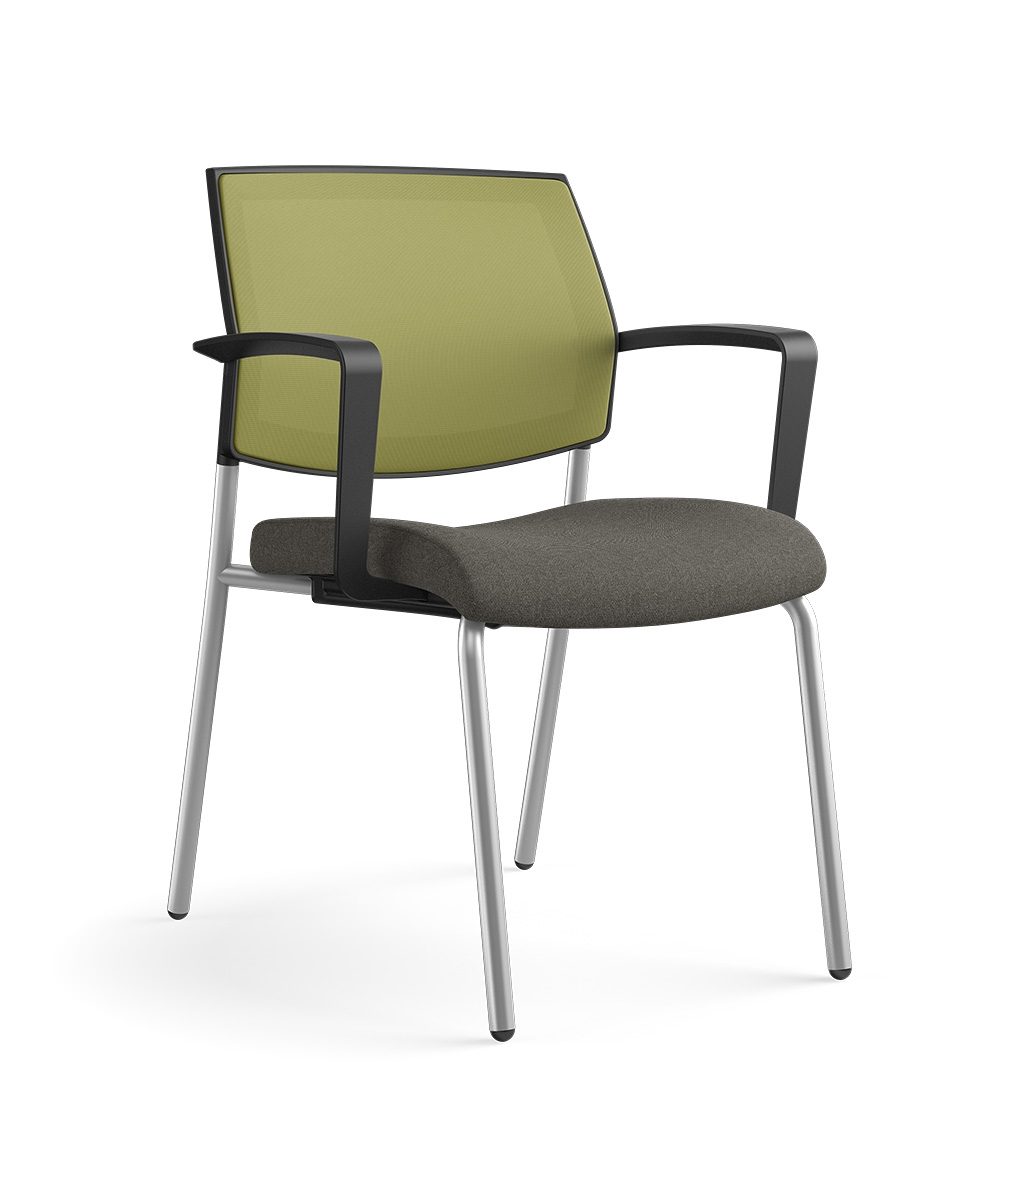 SitOnIt Seating, Side, The revitalized Focus Side combines comfort and design for multi-purpose, office or reception areas.